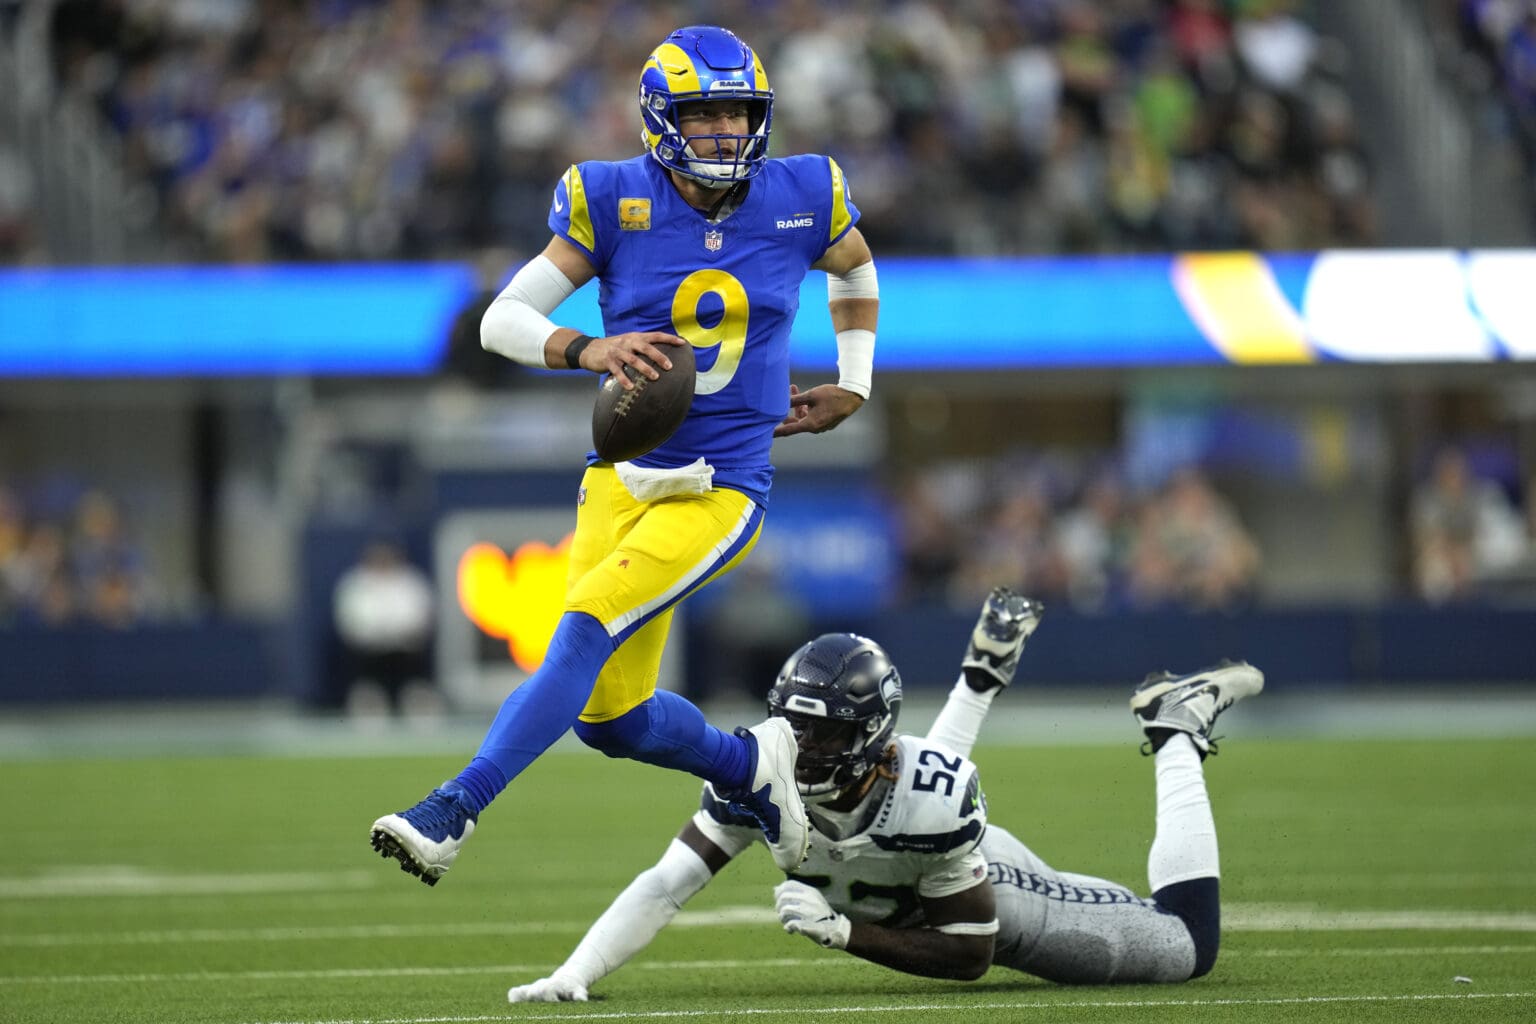 Los Angeles Rams quarterback Matthew Stafford (9) runs the ball after evading a tackle from a defender, leaving linebacker Darell Taylor on the grass.